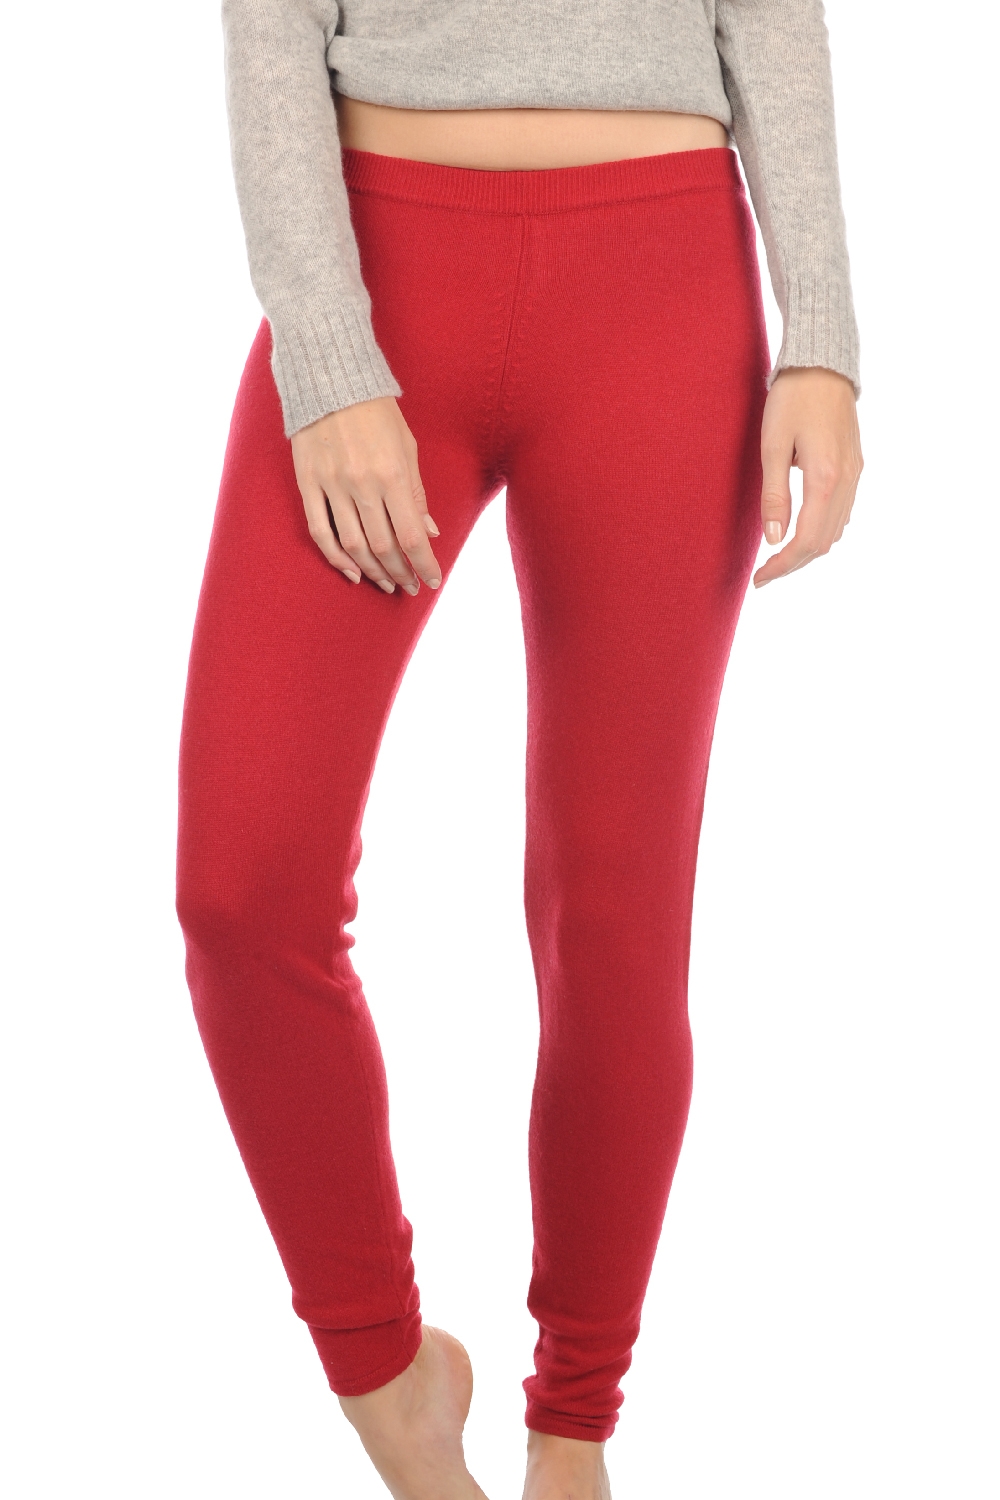 Cashmere ladies timeless classics xelina blood red xs